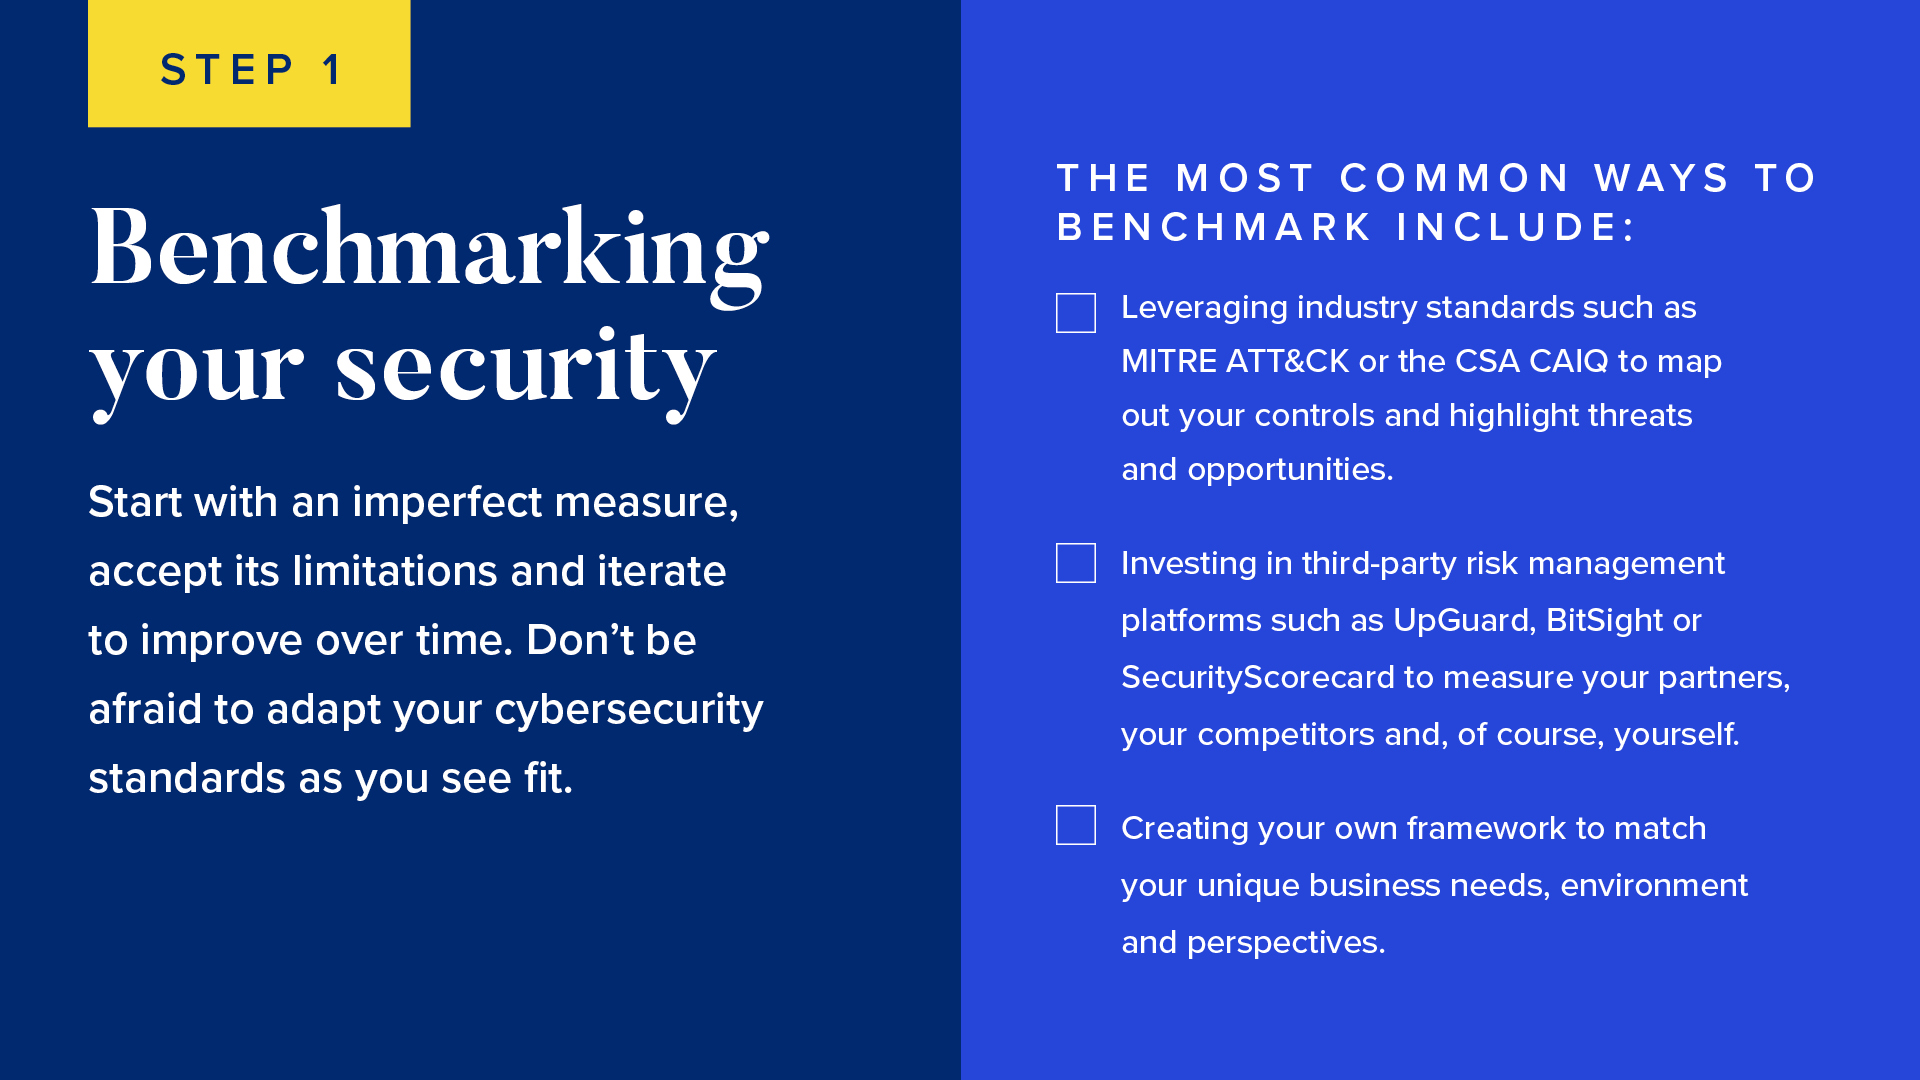 INFOGRAPHIC #1: Benchmarking your security 

Start with an imperfect measure, accept its limitations and iterate to improve over time. Don’t be afraid to adapt your cybersecurity standards as you see fit.

The most common ways to benchmark include:

Leveraging industry standards such as MITRE ATT&CK or the CSA CAIQ to map out your controls and highlight threats and opportunities.
Investing in third-party risk management platforms such as UpGuard, BitSight or SecurityScorecard to measure your partners, your competitors and, of course, yourself.
Creating your own framework to match your unique business needs, environment and perspectives. 
